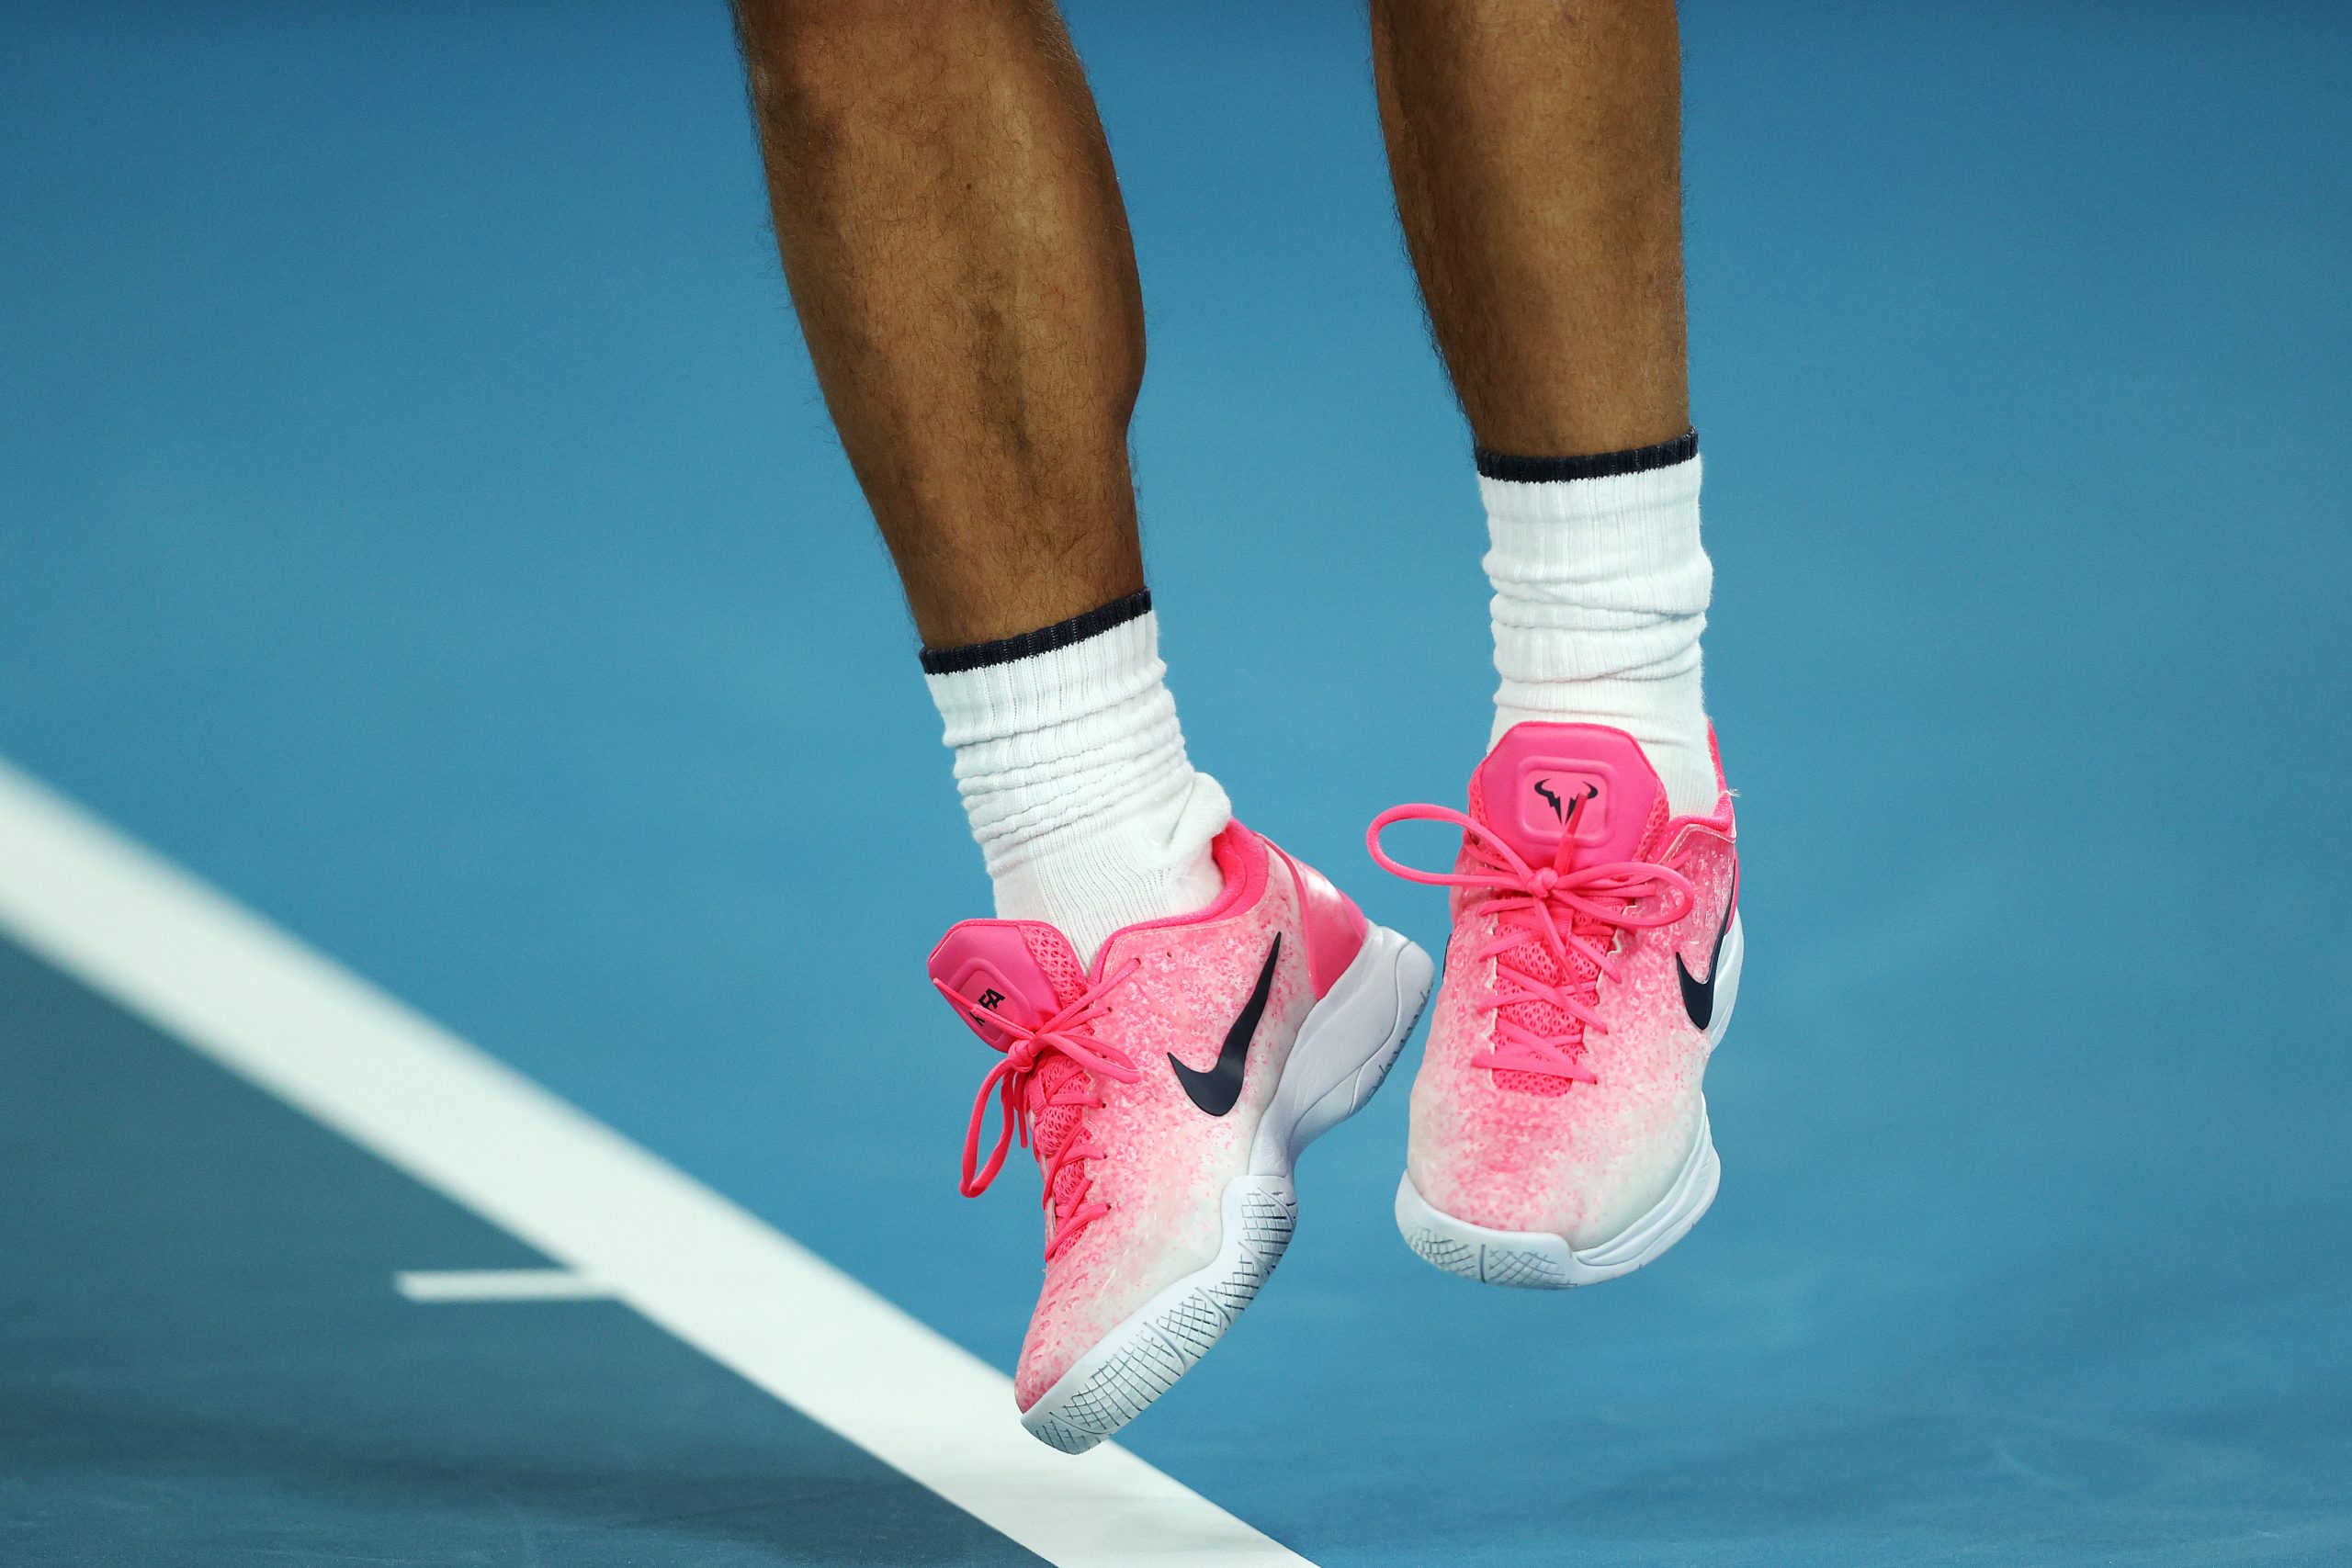 What tennis shoes do Federer, Djokovic, Nadal and Serena wear?